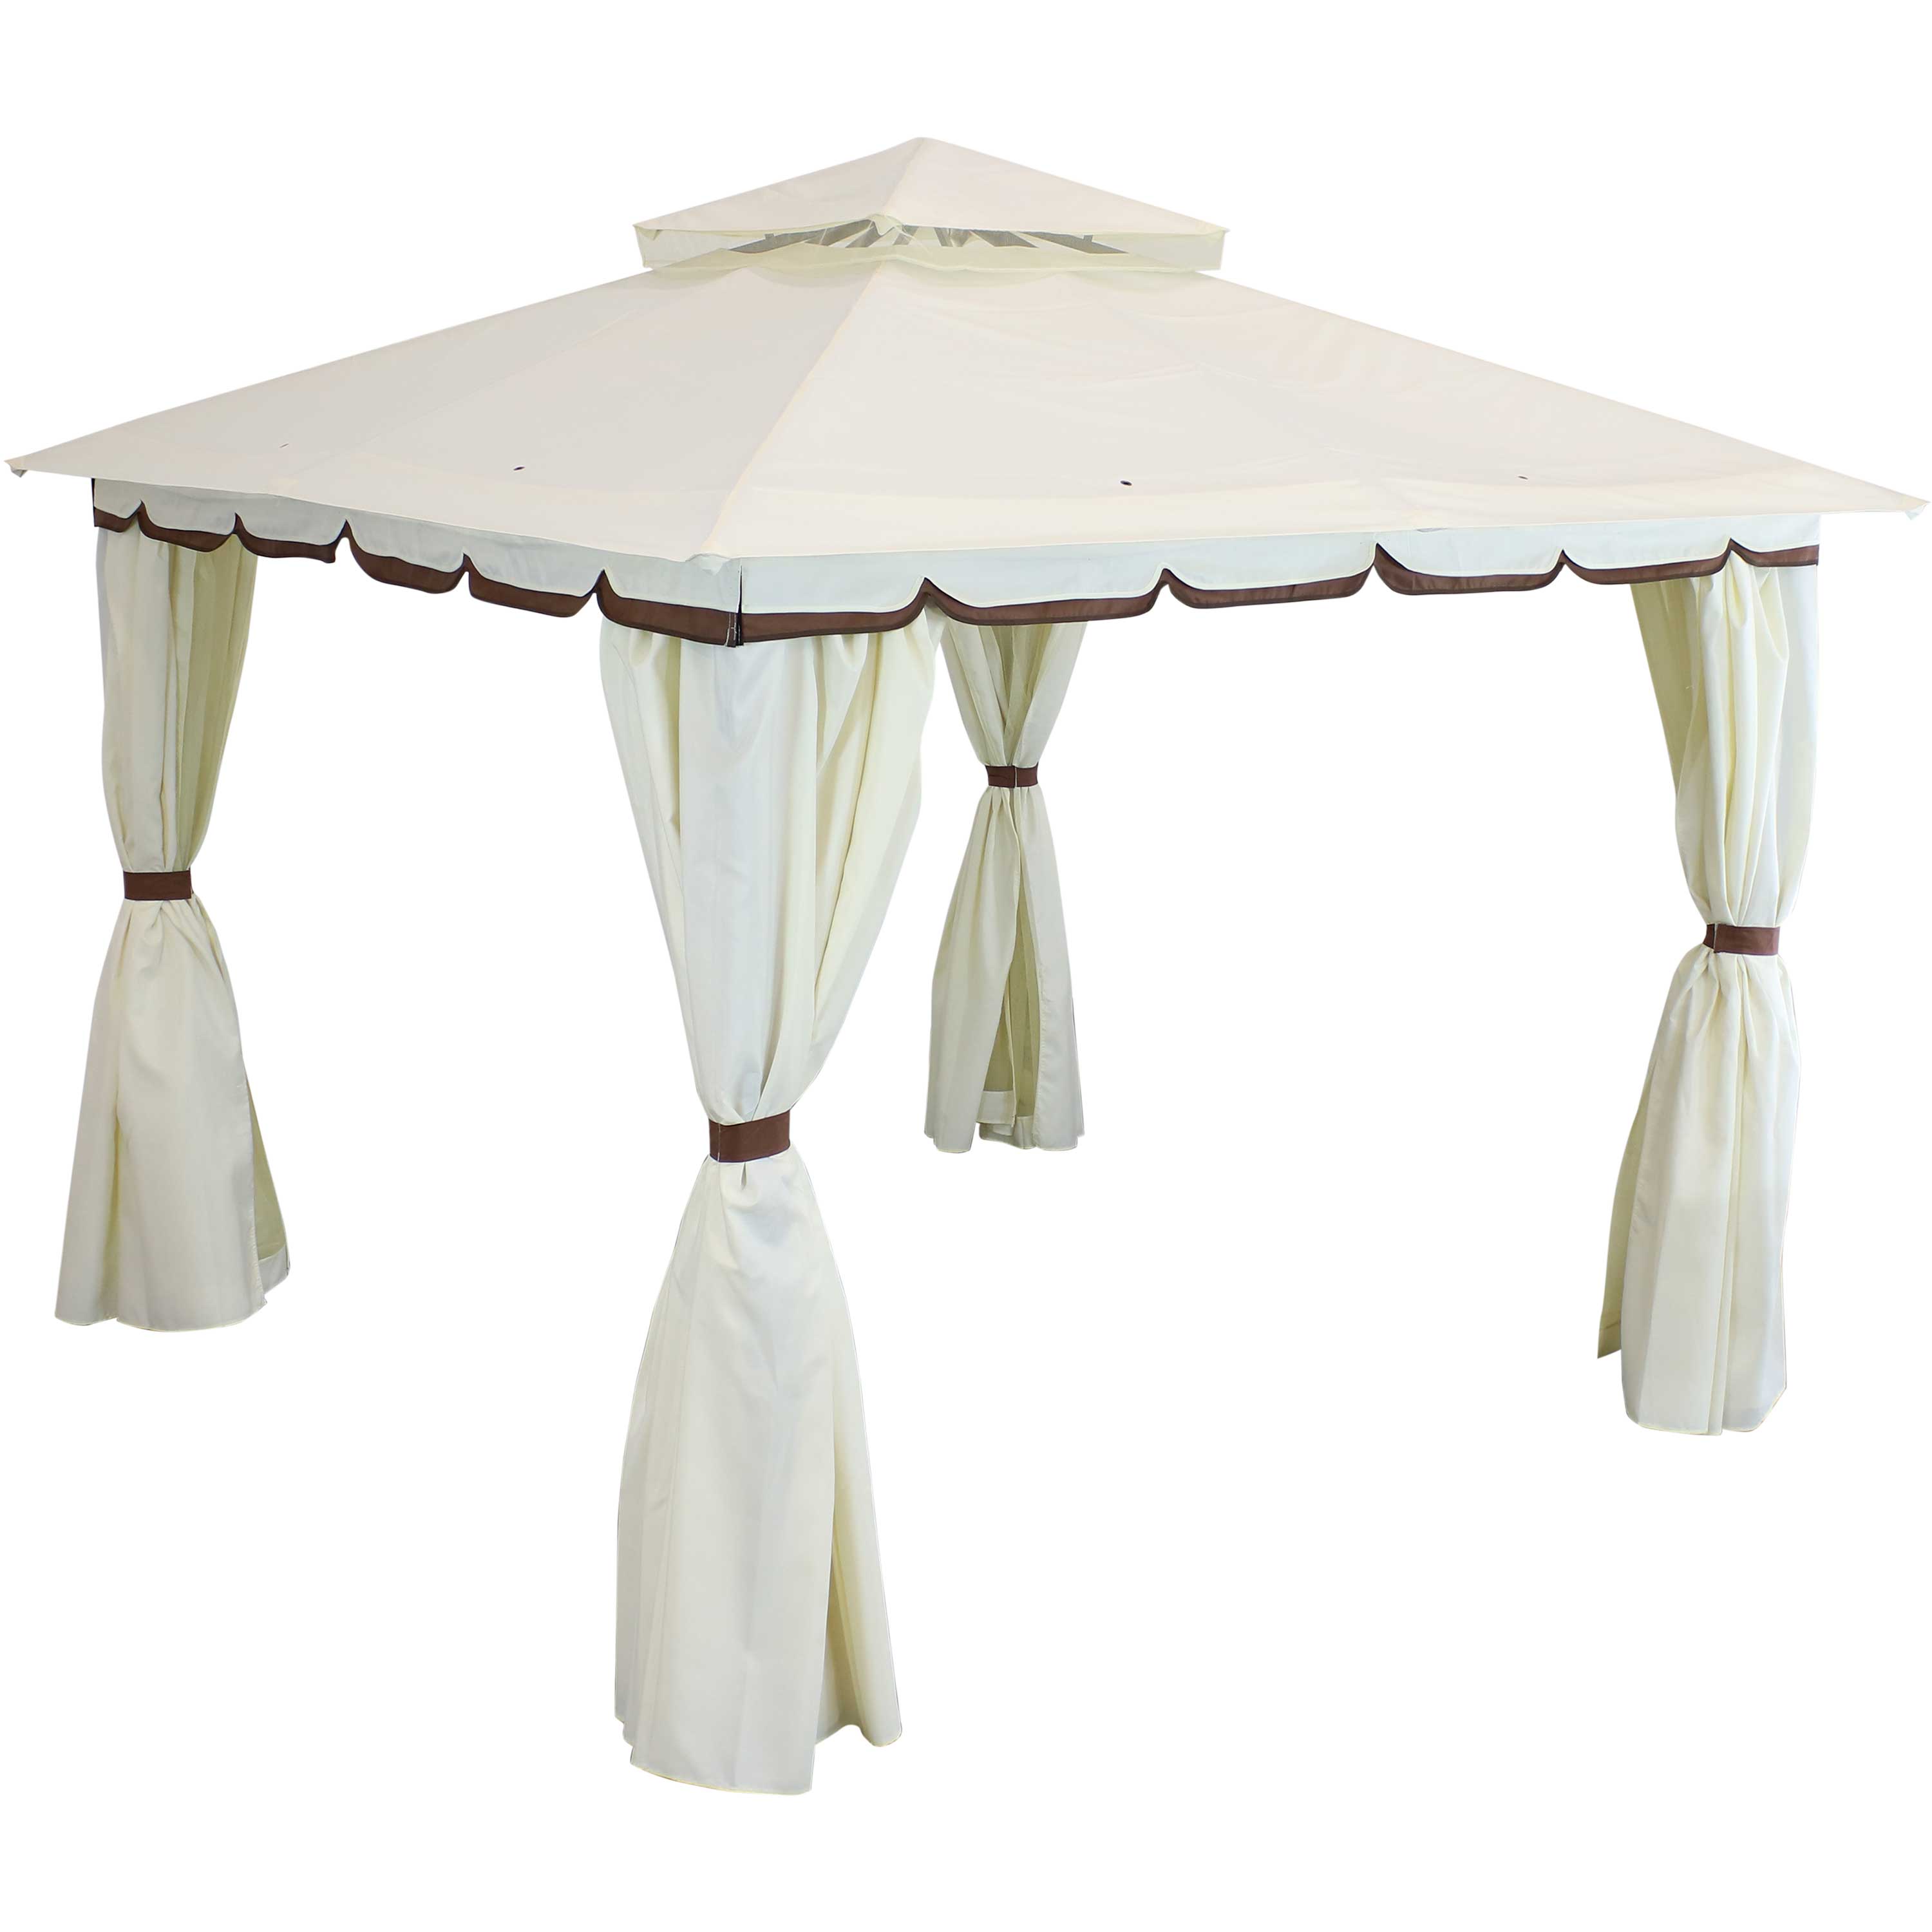 Sunnydaze Soft Top Patio Gazebo - 10x10 Foot with Mesh Screen and Privacy Wall - Cream